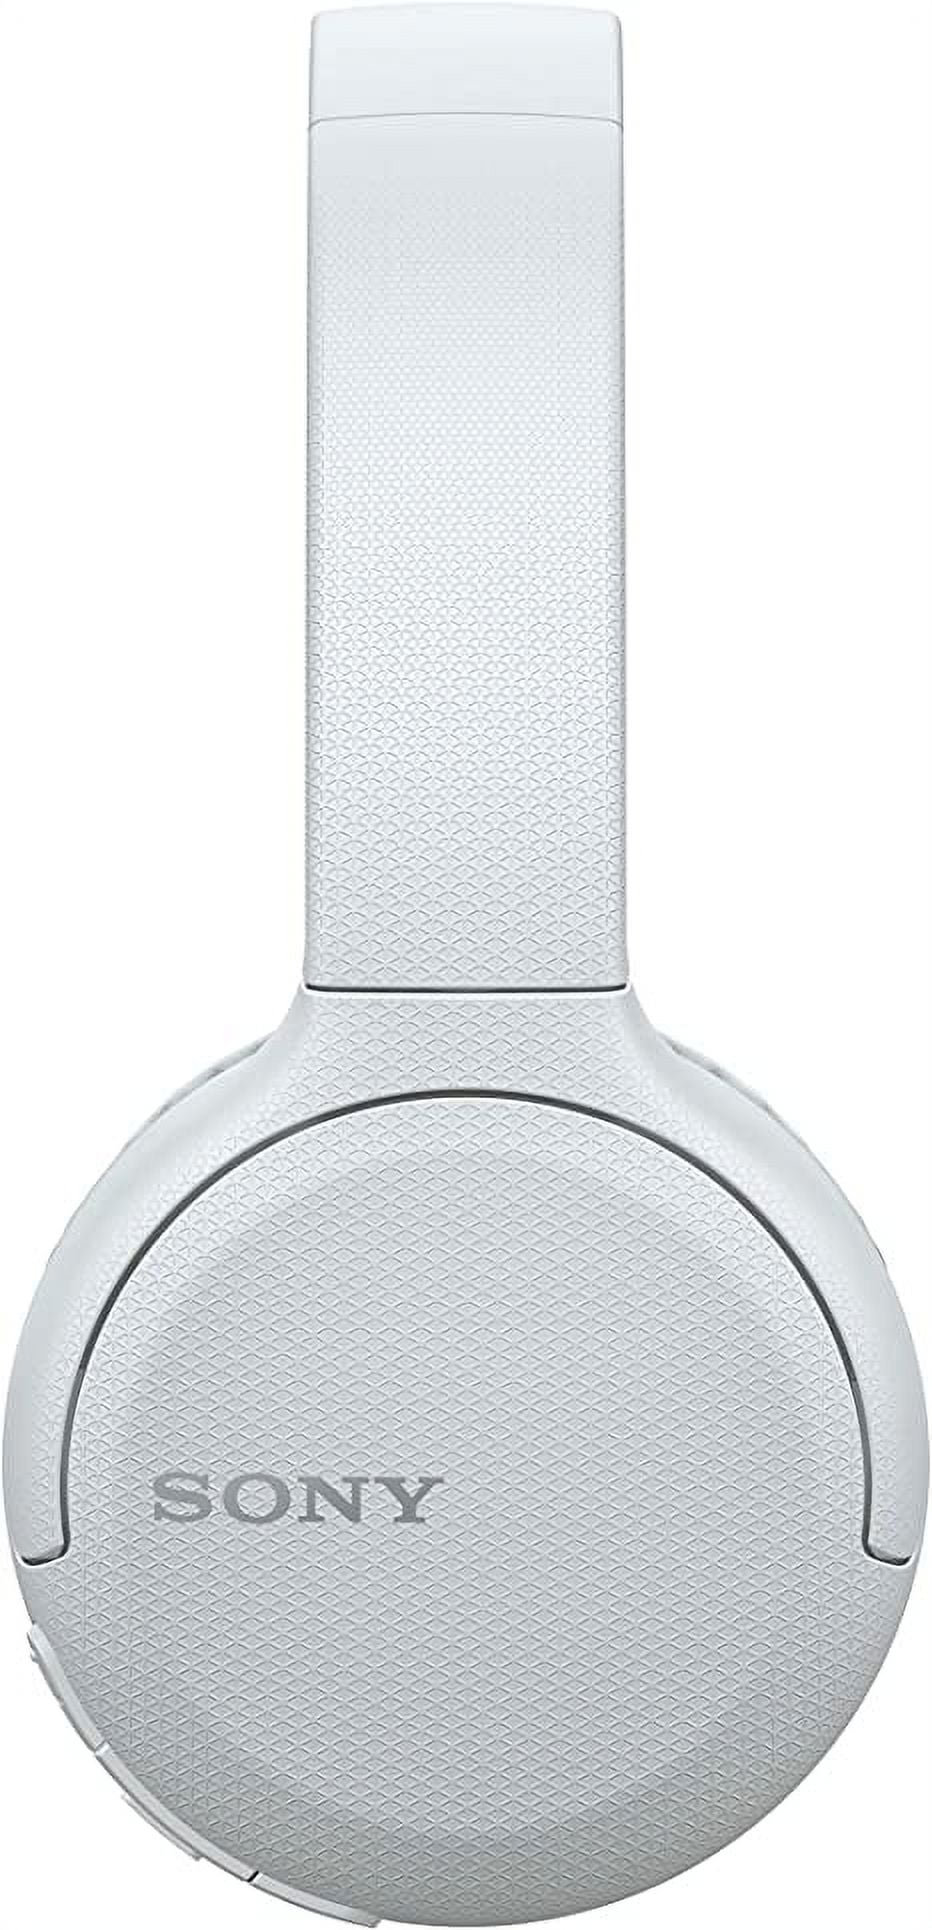 Sony Wireless Headphones WH-CH510: Wireless Bluetooth On-Ear Headset with  Mic for Phone-Call, White 